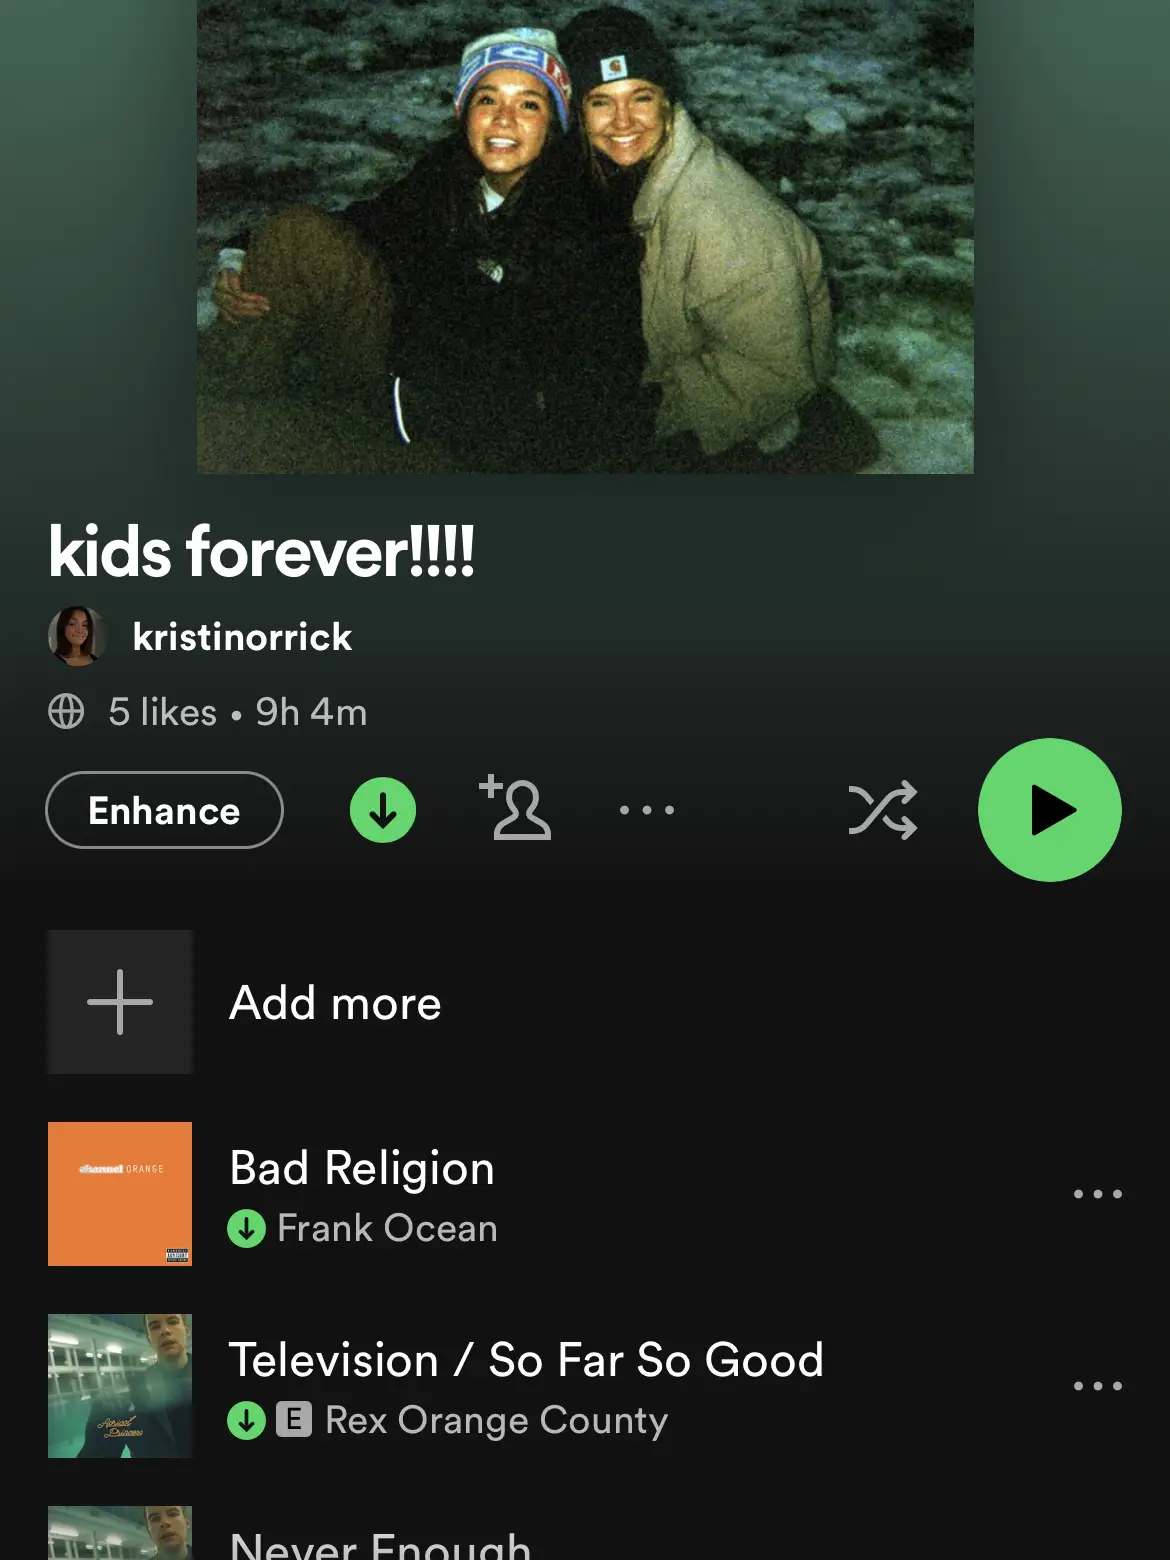  A playlist of music with the words " kids forever!!!" at the top.